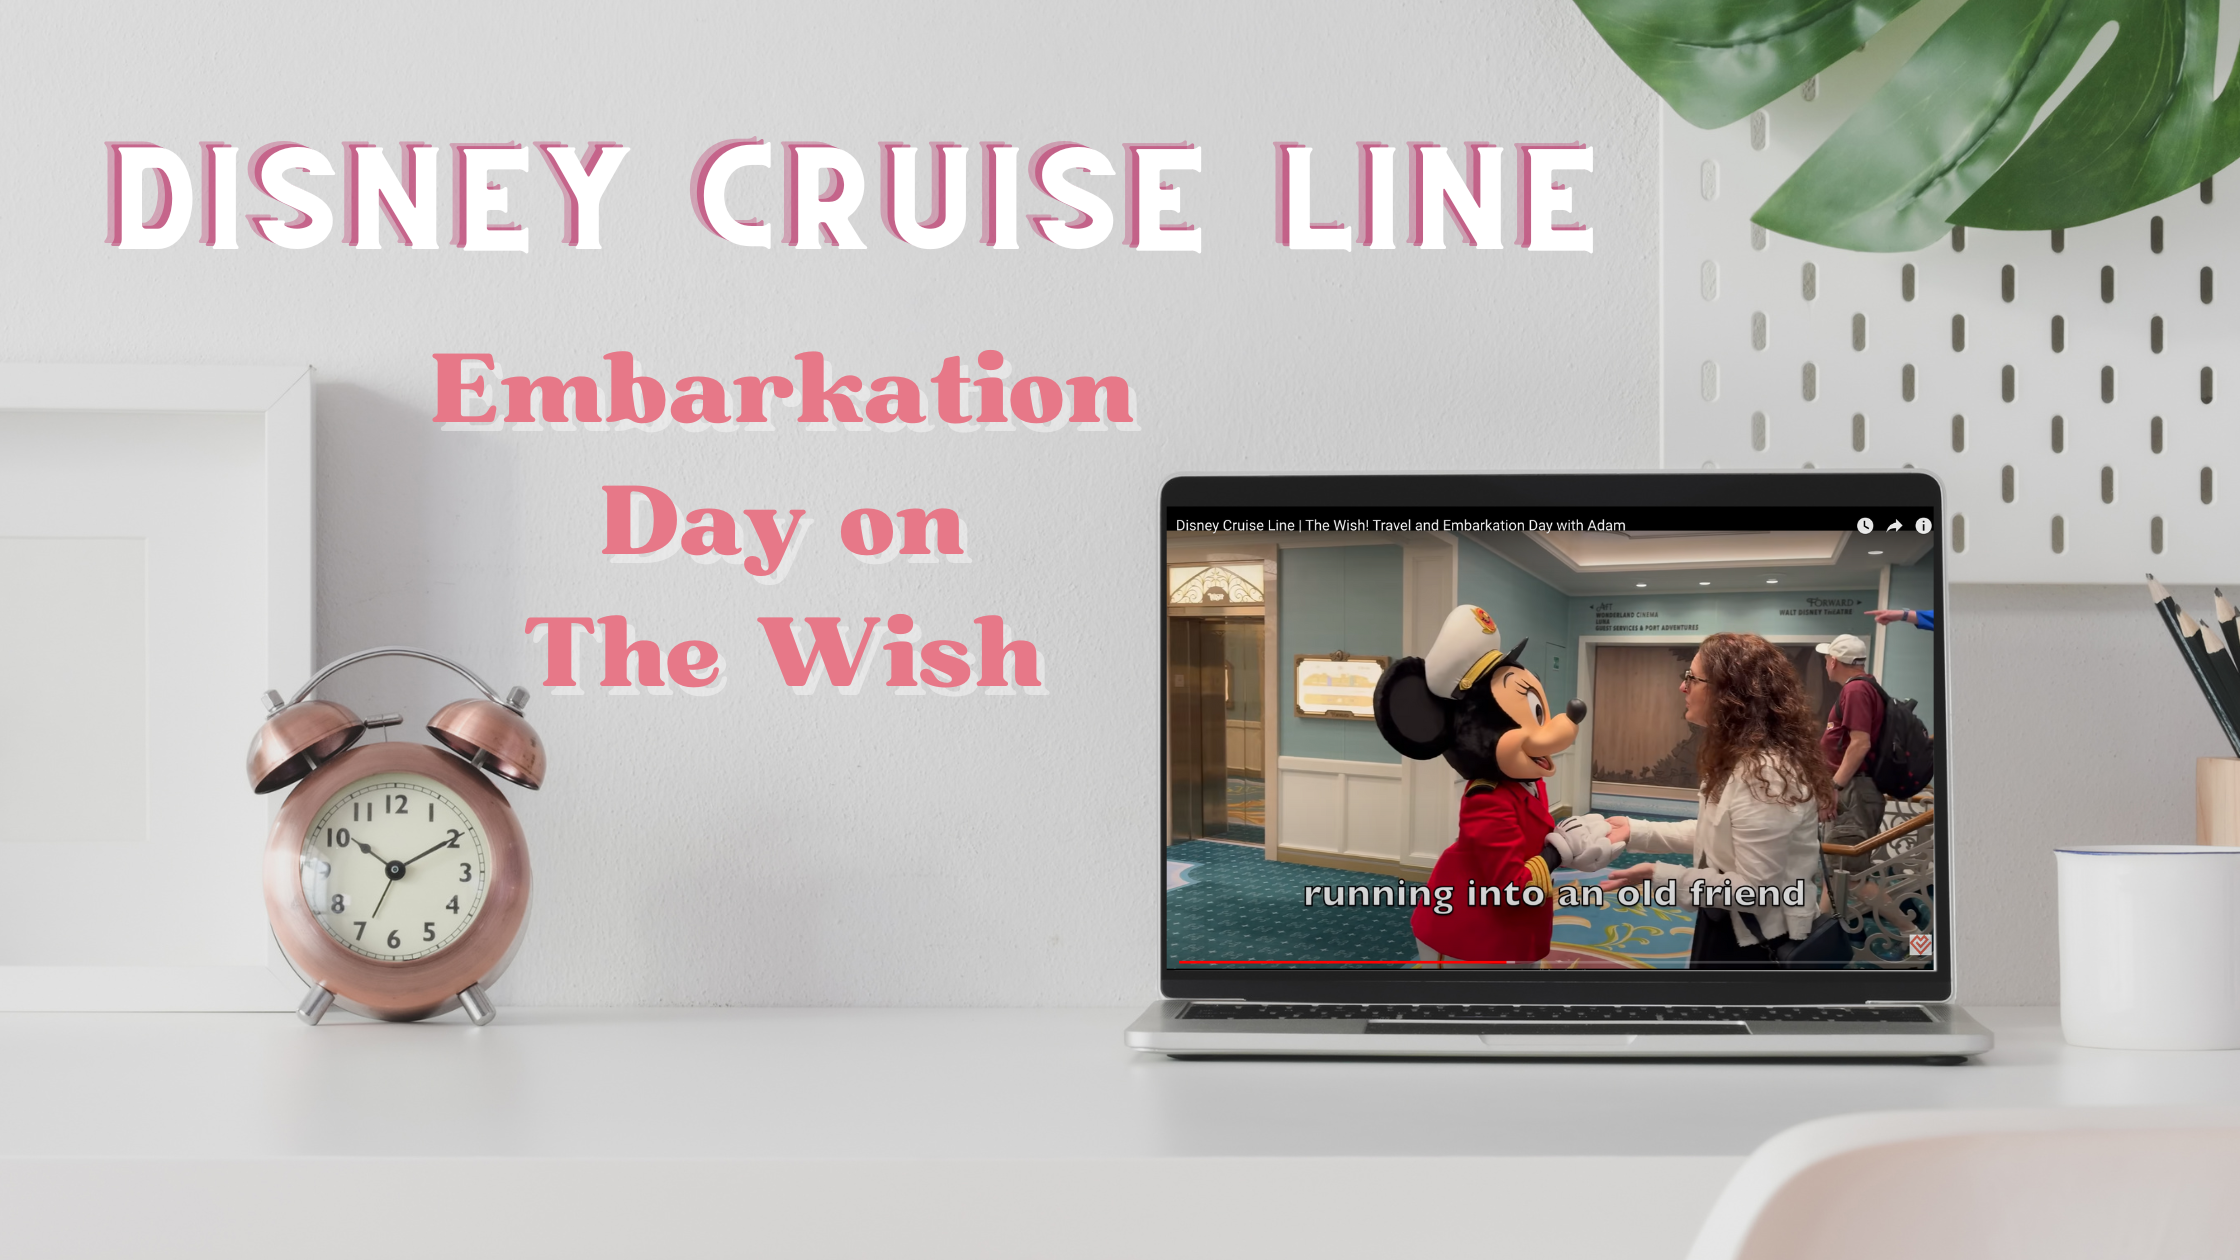 Disney Cruise Line The Wish Embarkation Day